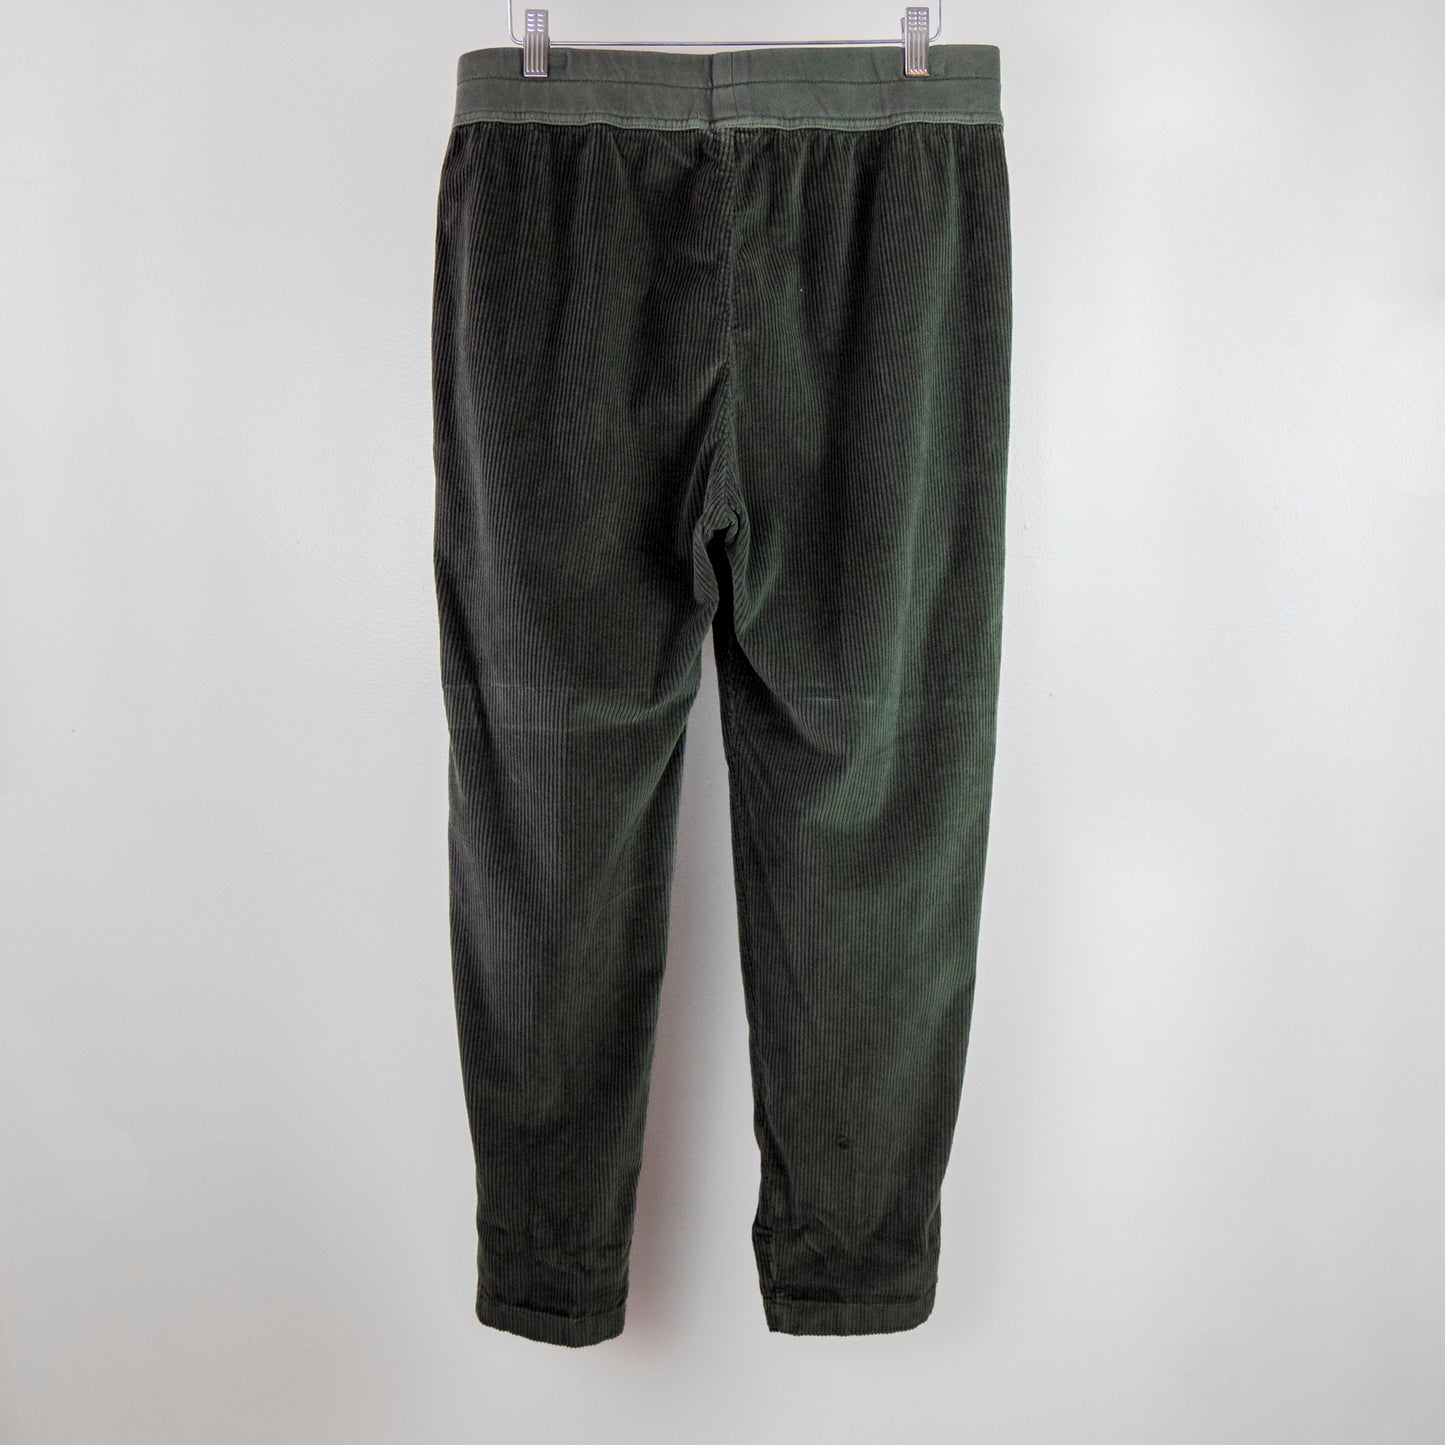 James Perse - Relaxed Fit Corduroy Pant - Fin Pigment